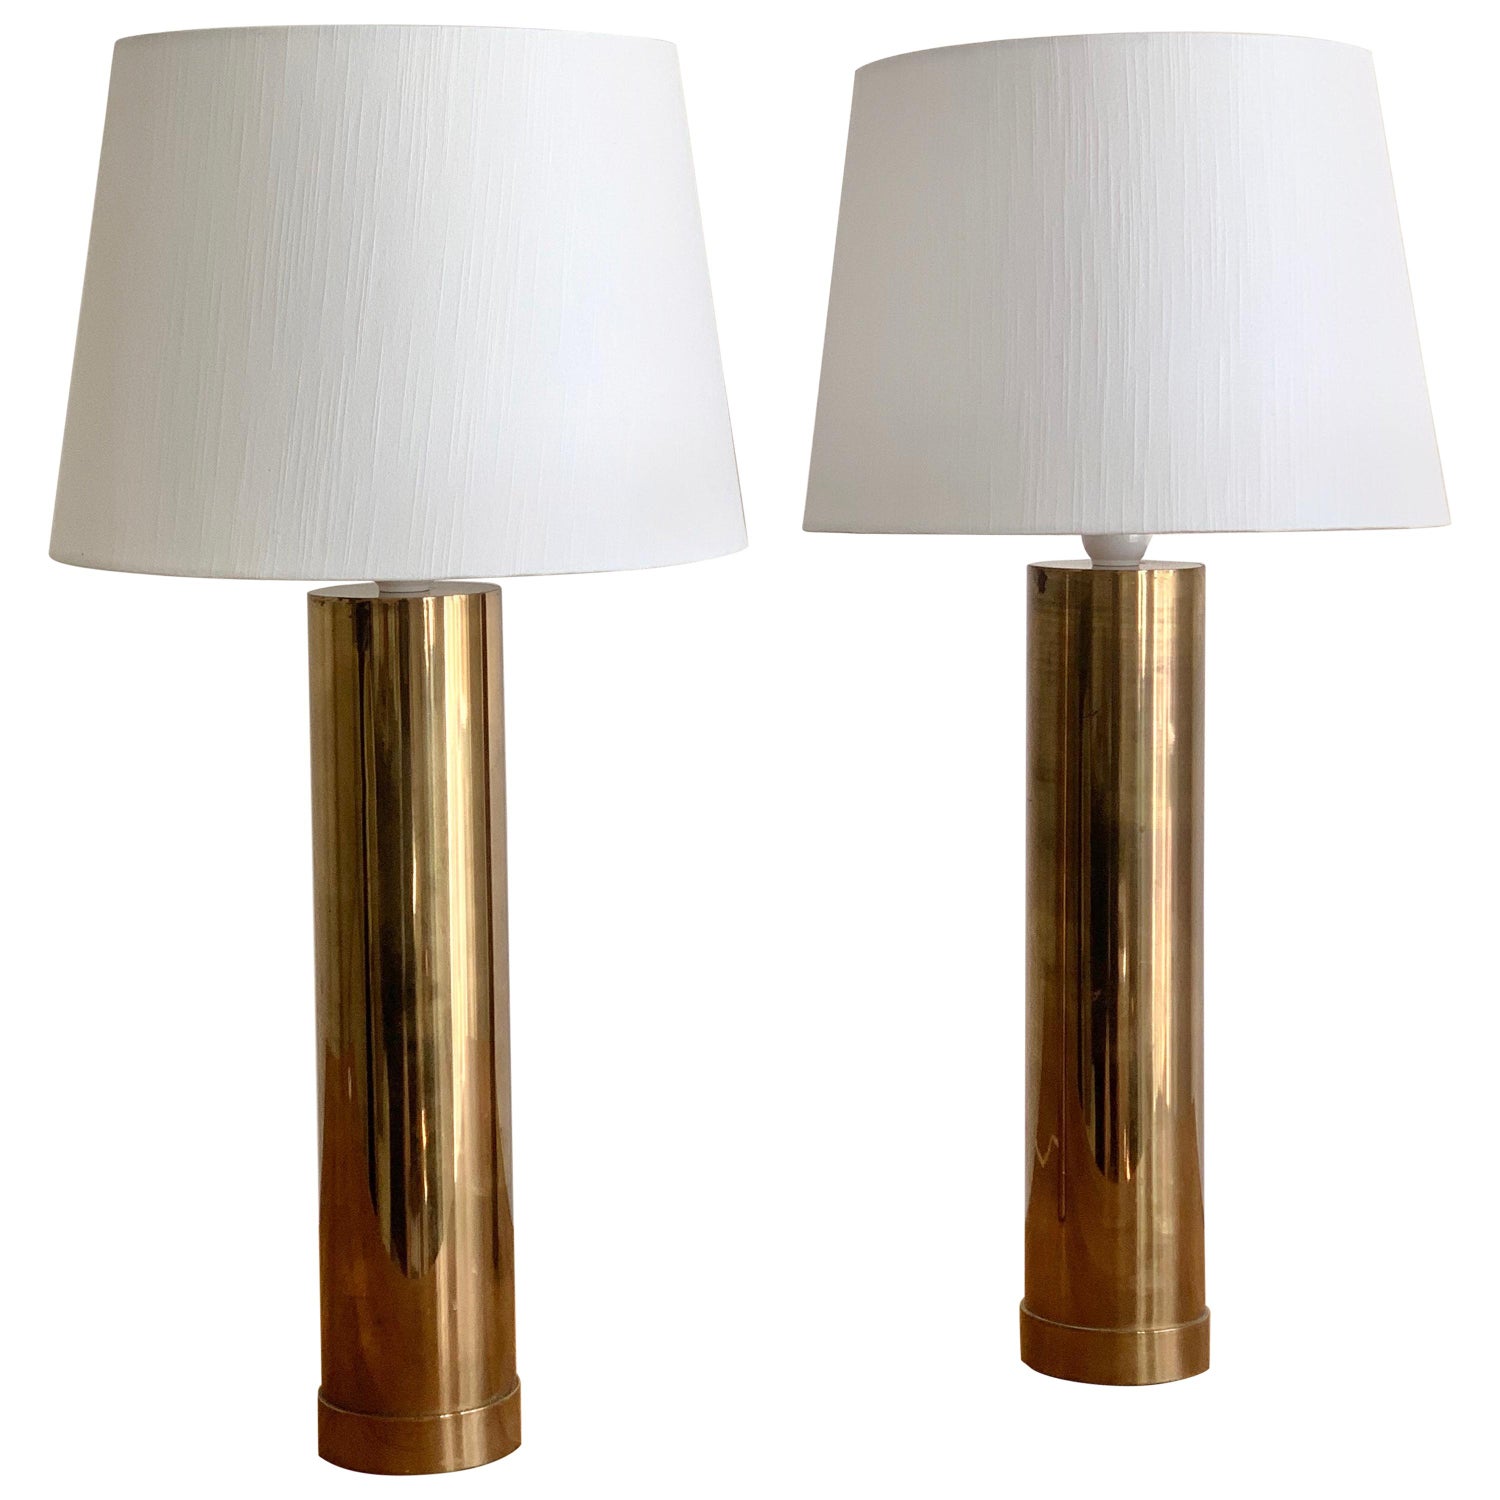 Pair of Bergboms "B-09" Table Lamps in Brass, 1960s For Sale at 1stDibs